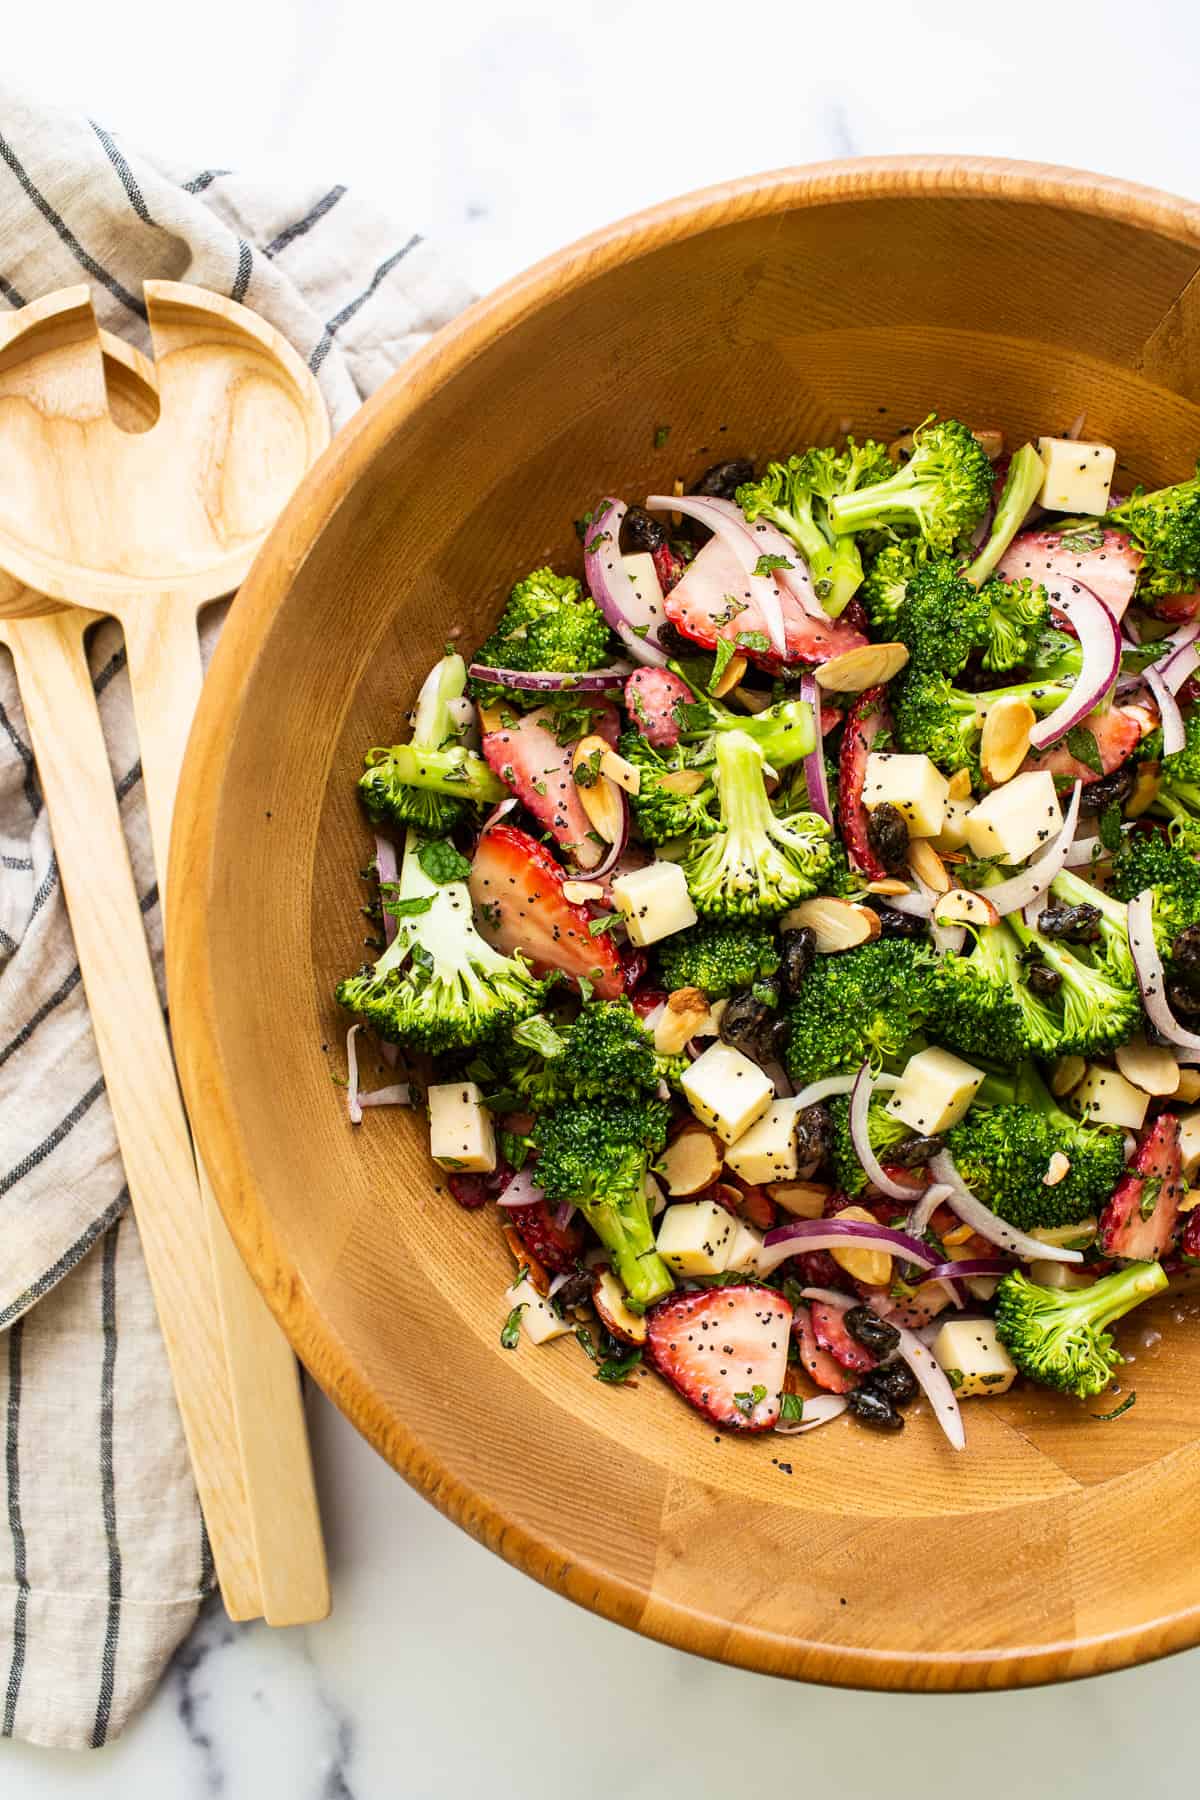 Strawberry broccoli salad in a wooden bowl.